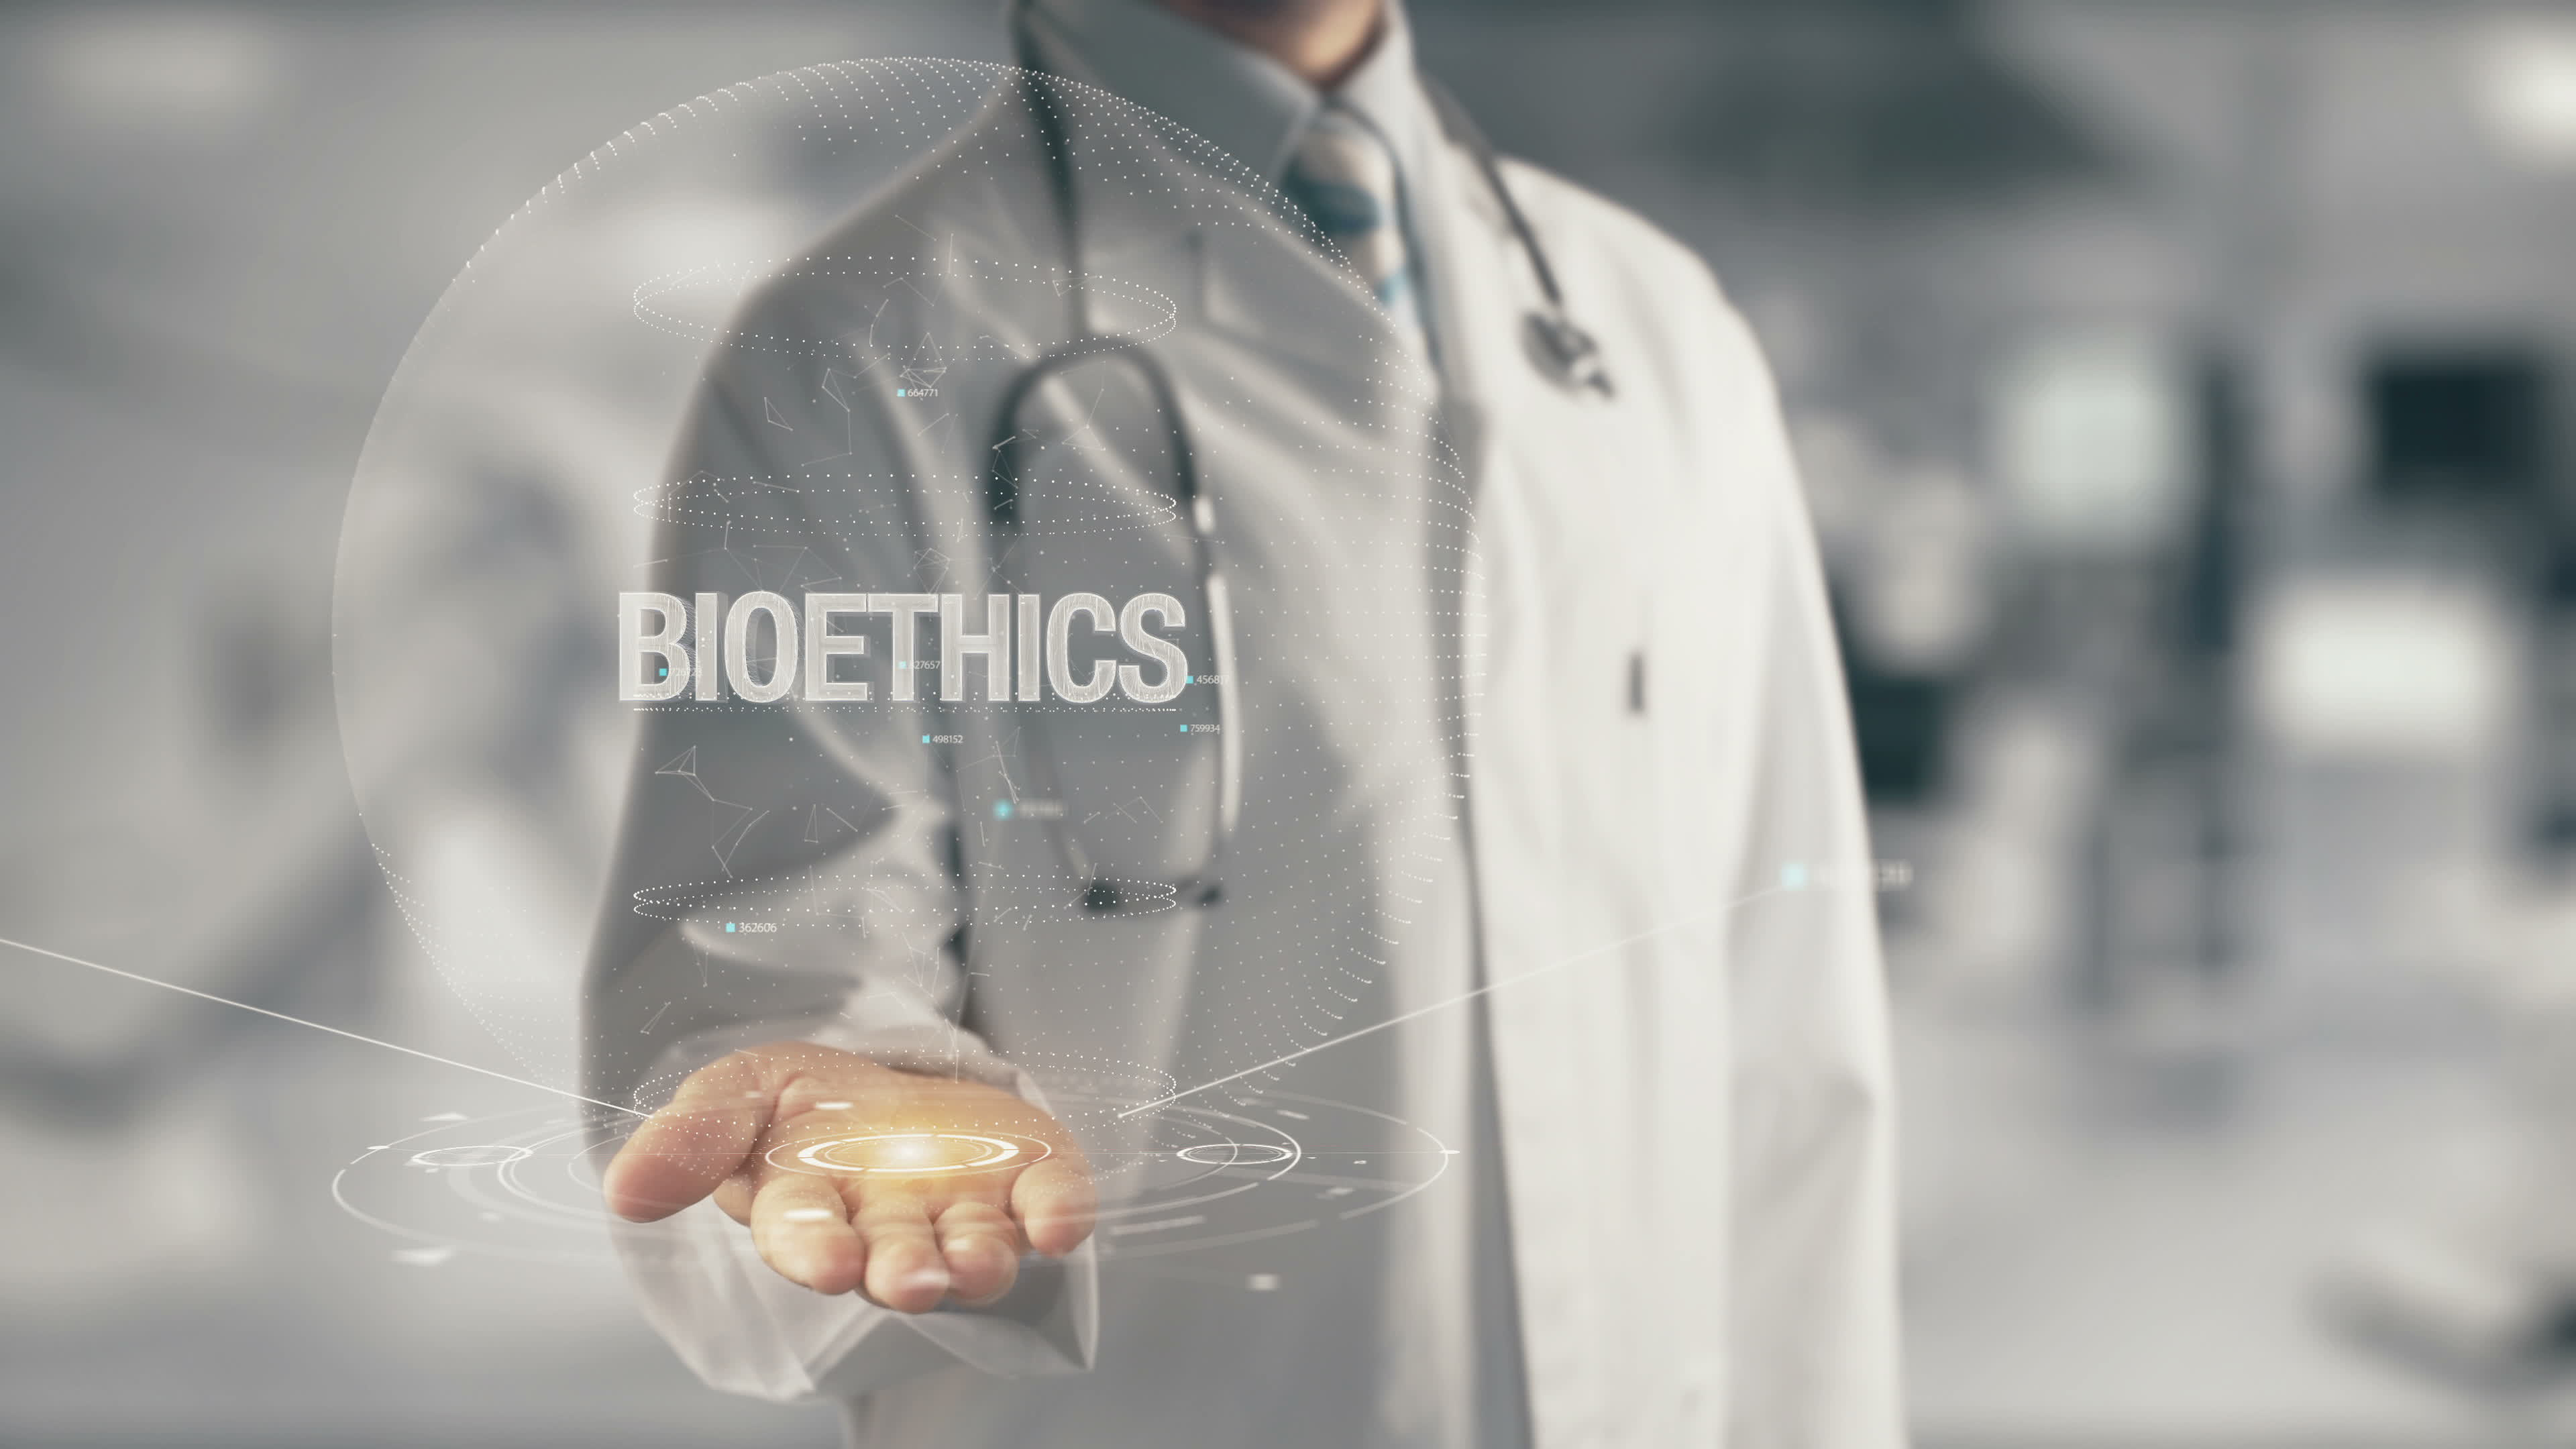 NIH Bioethics courses, training and lecture opportunities